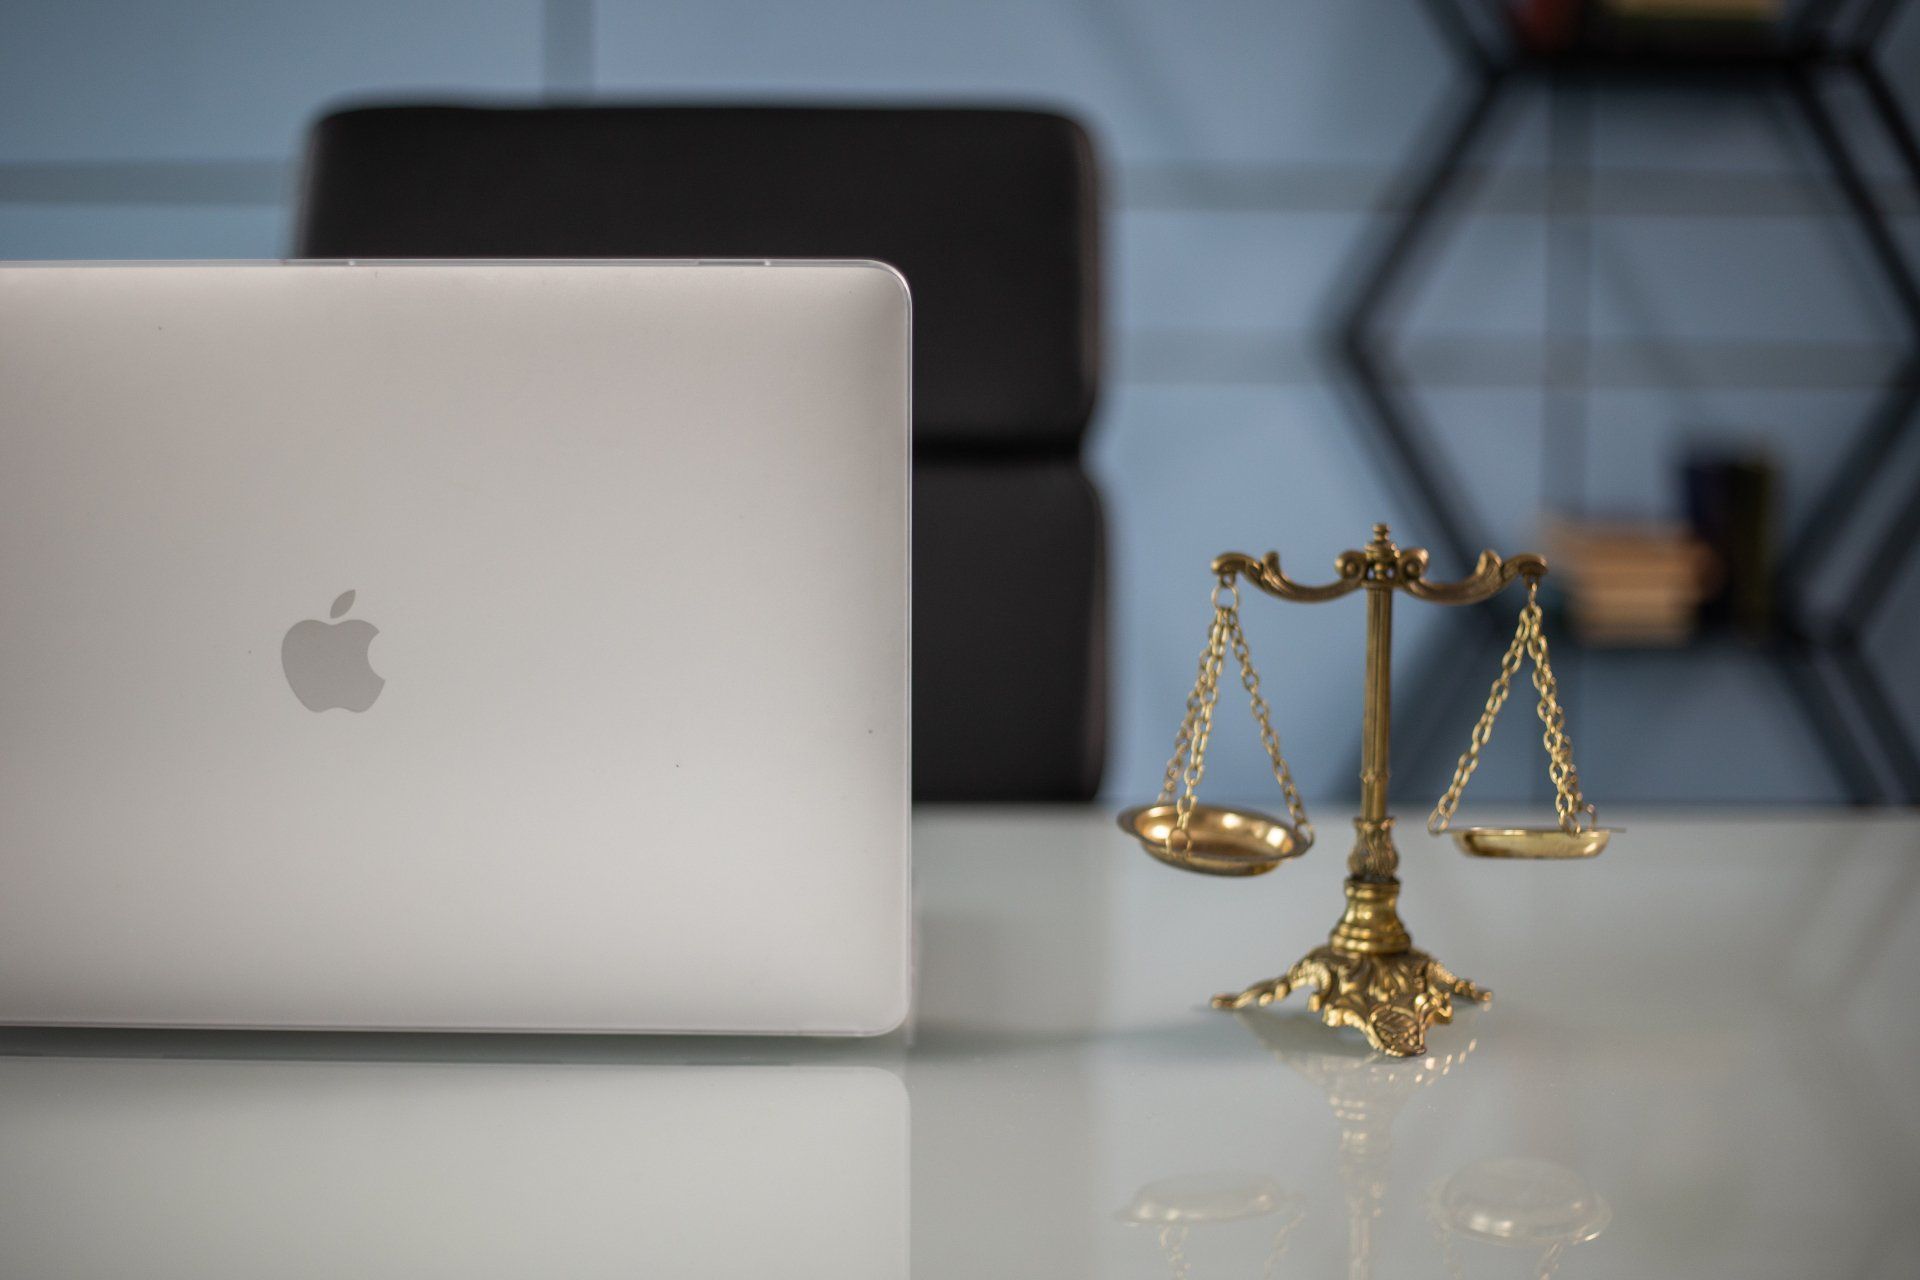 Scales of Justice next to a Laptop.